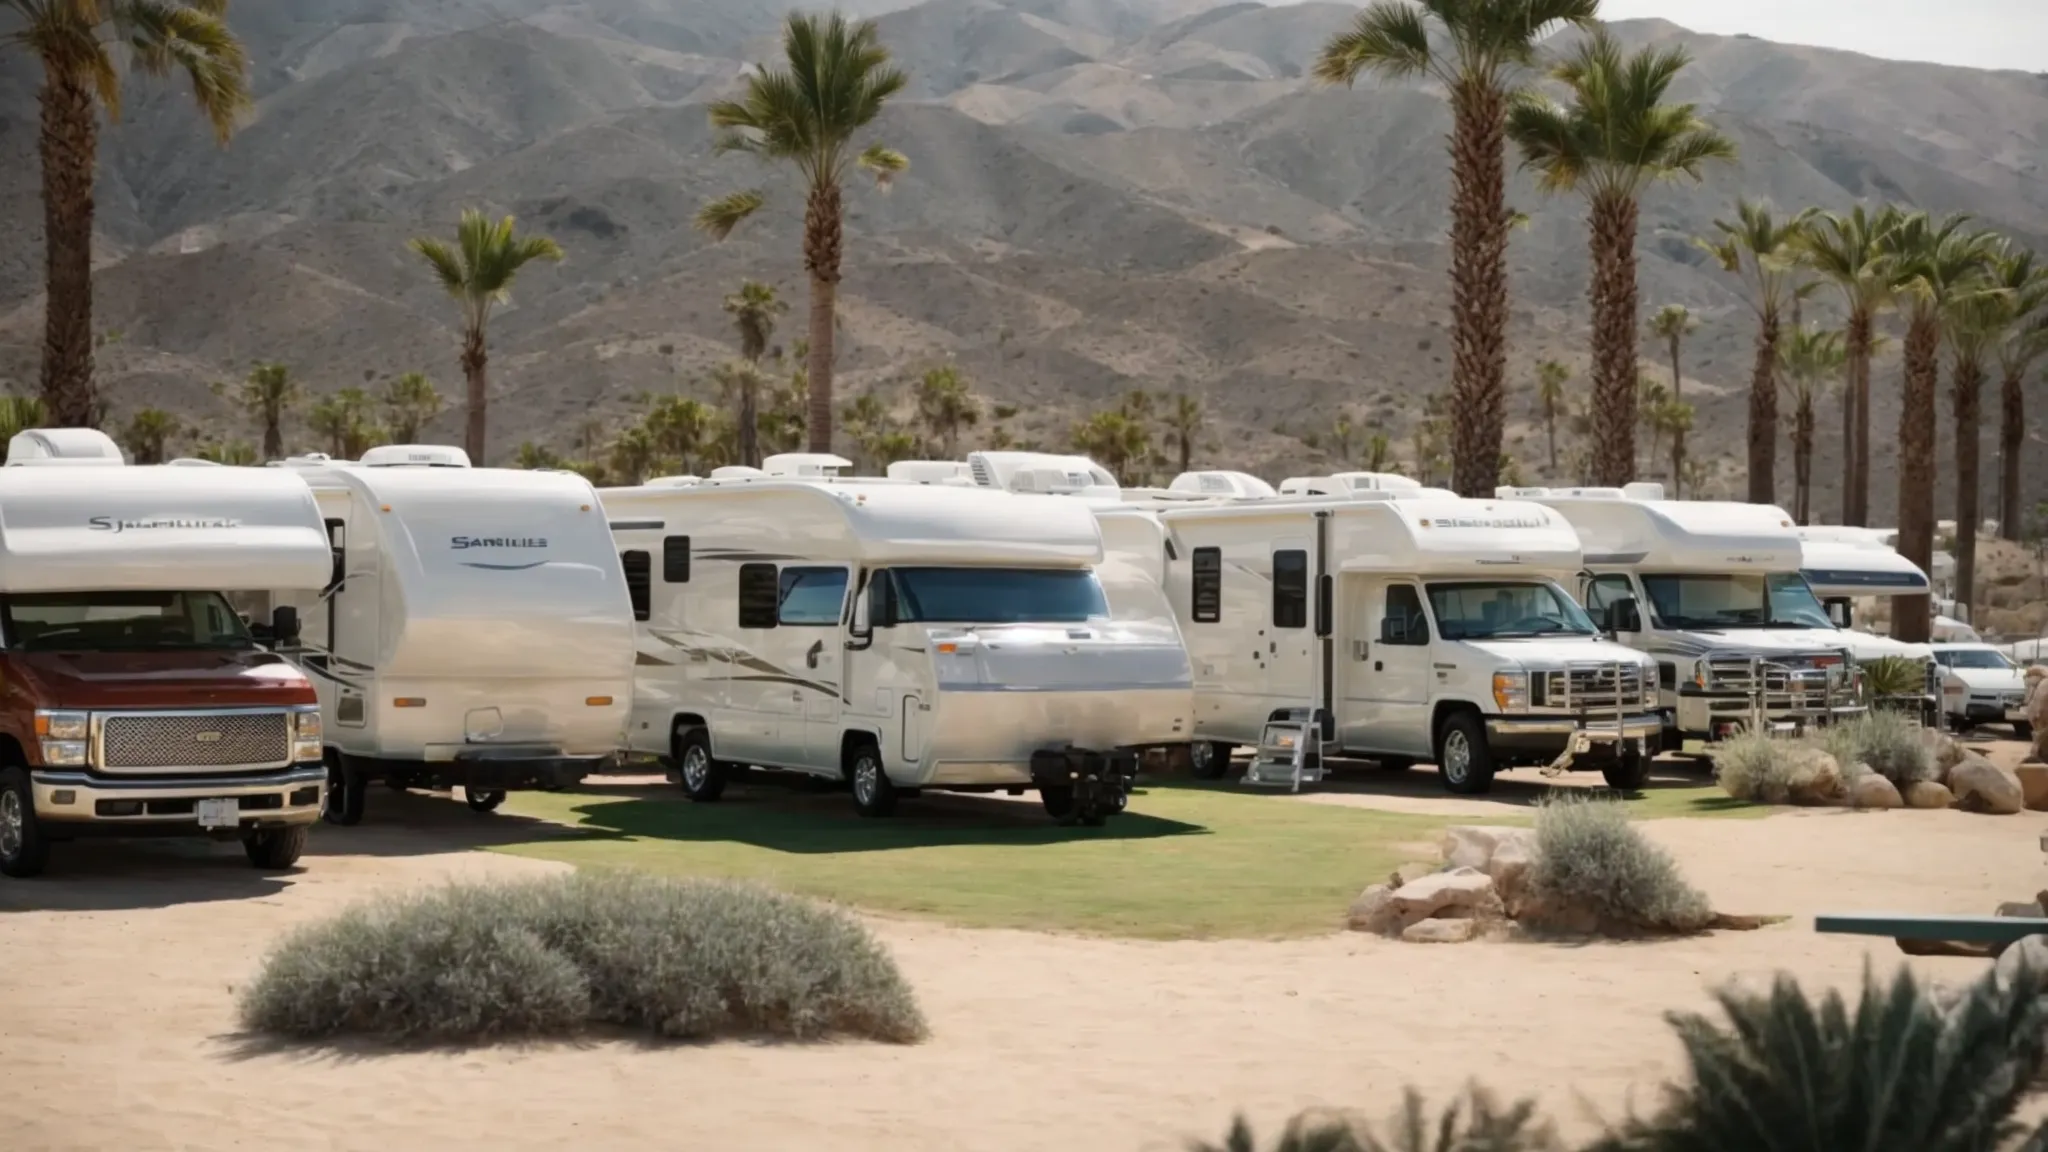 rvs of various sizes are parked side-by-side amidst the coastal landscape of san diego, under the welcoming shade of palm trees.